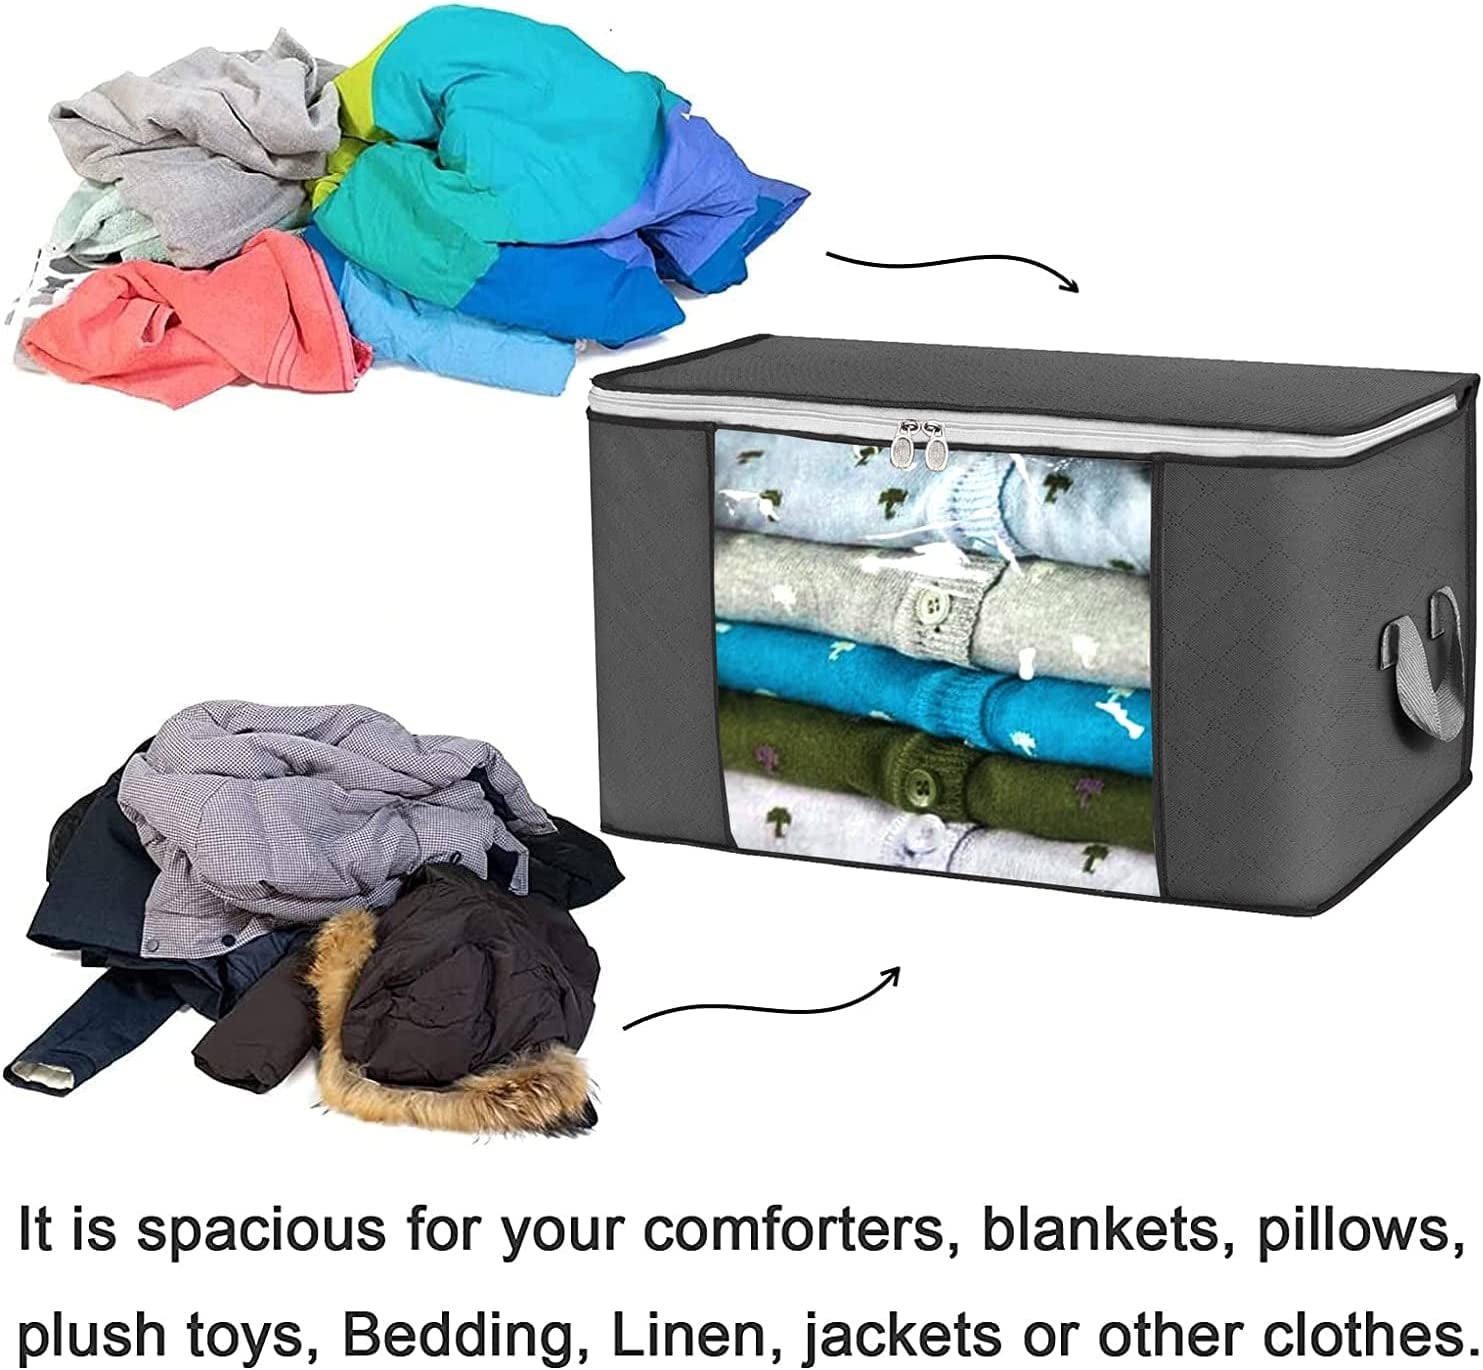 Set of 4 - XLarge Capacity Clothes Storage Bags with Clear Window - Reinforced Handle - Foldable with Sturdy Zipper - Thick & Durable Fabric for Comforters Blankets Bedding Pillows Clothing Toys - Easy to Carry 24" X 16" X 14" Gray